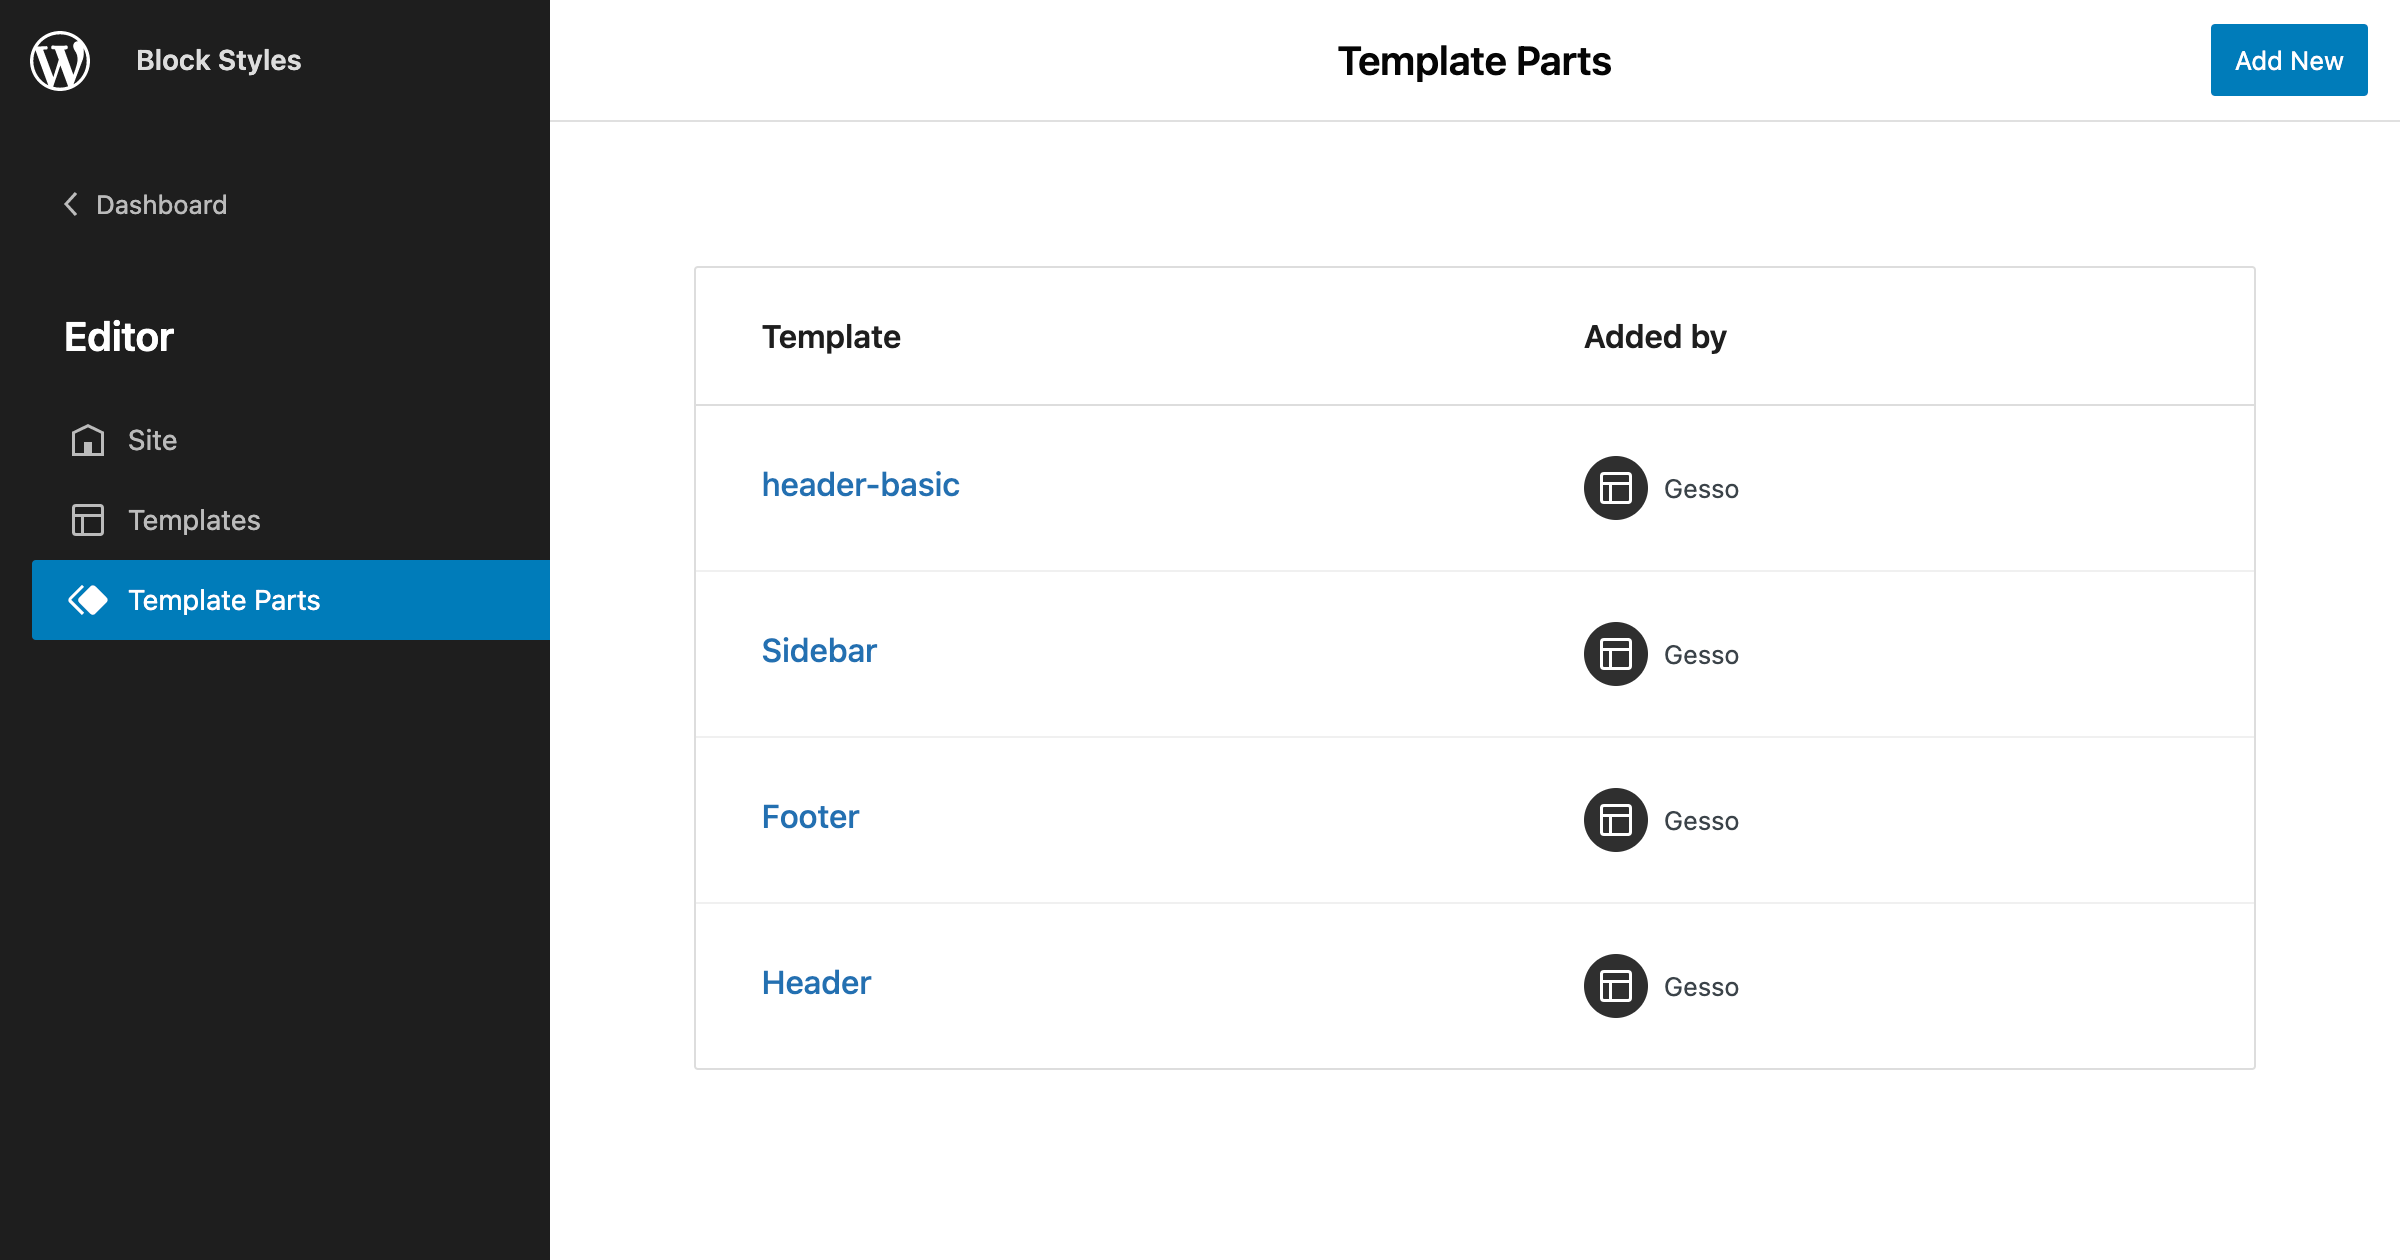 View individual template parts easily.